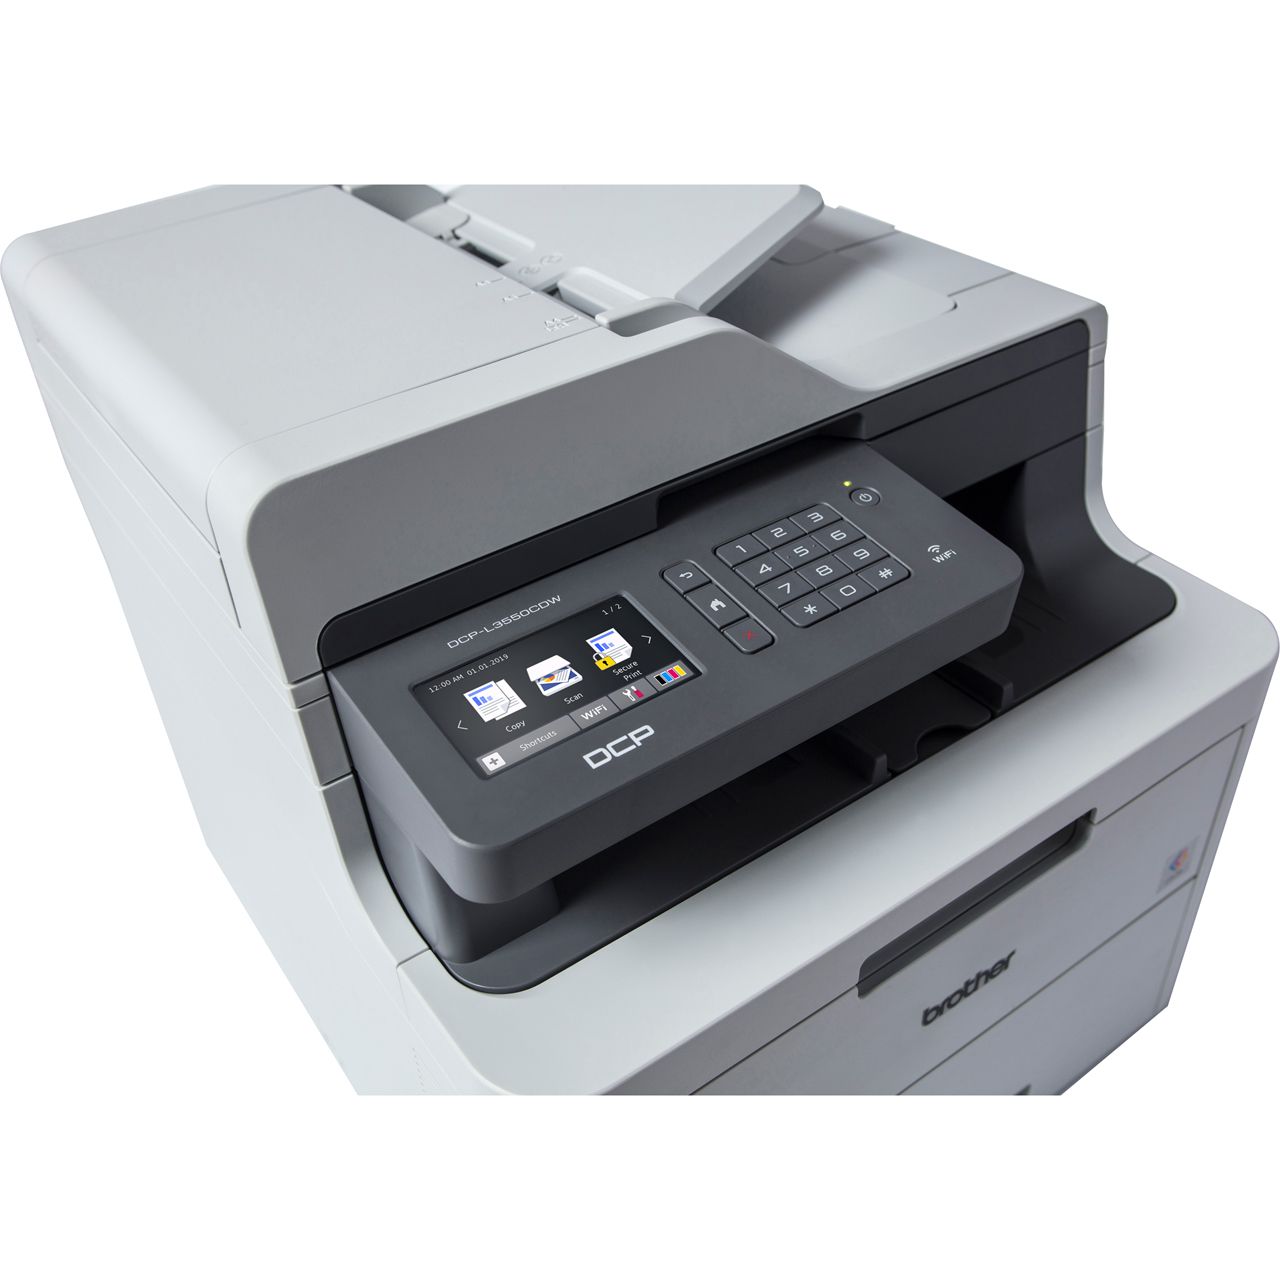 Styring Underholdning nummer DCP-L3550CDW | Brother 3-in-1 Colour Laser Printer | ao.com